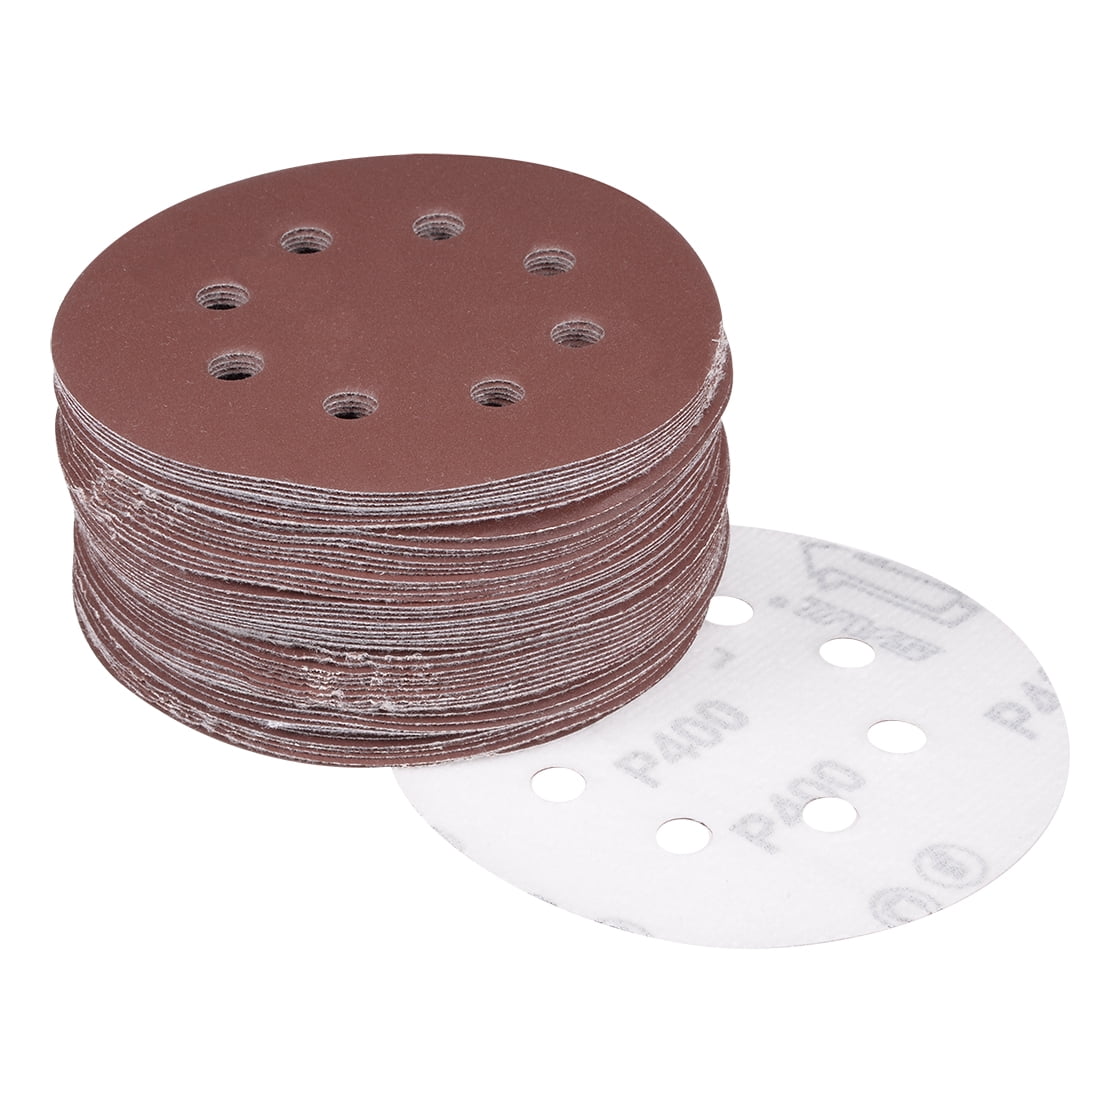 Details about   50 Pcs 5 Inches 8 Hole Hook And Loop Sanding Discs Round Sandpaper 100 Grit 